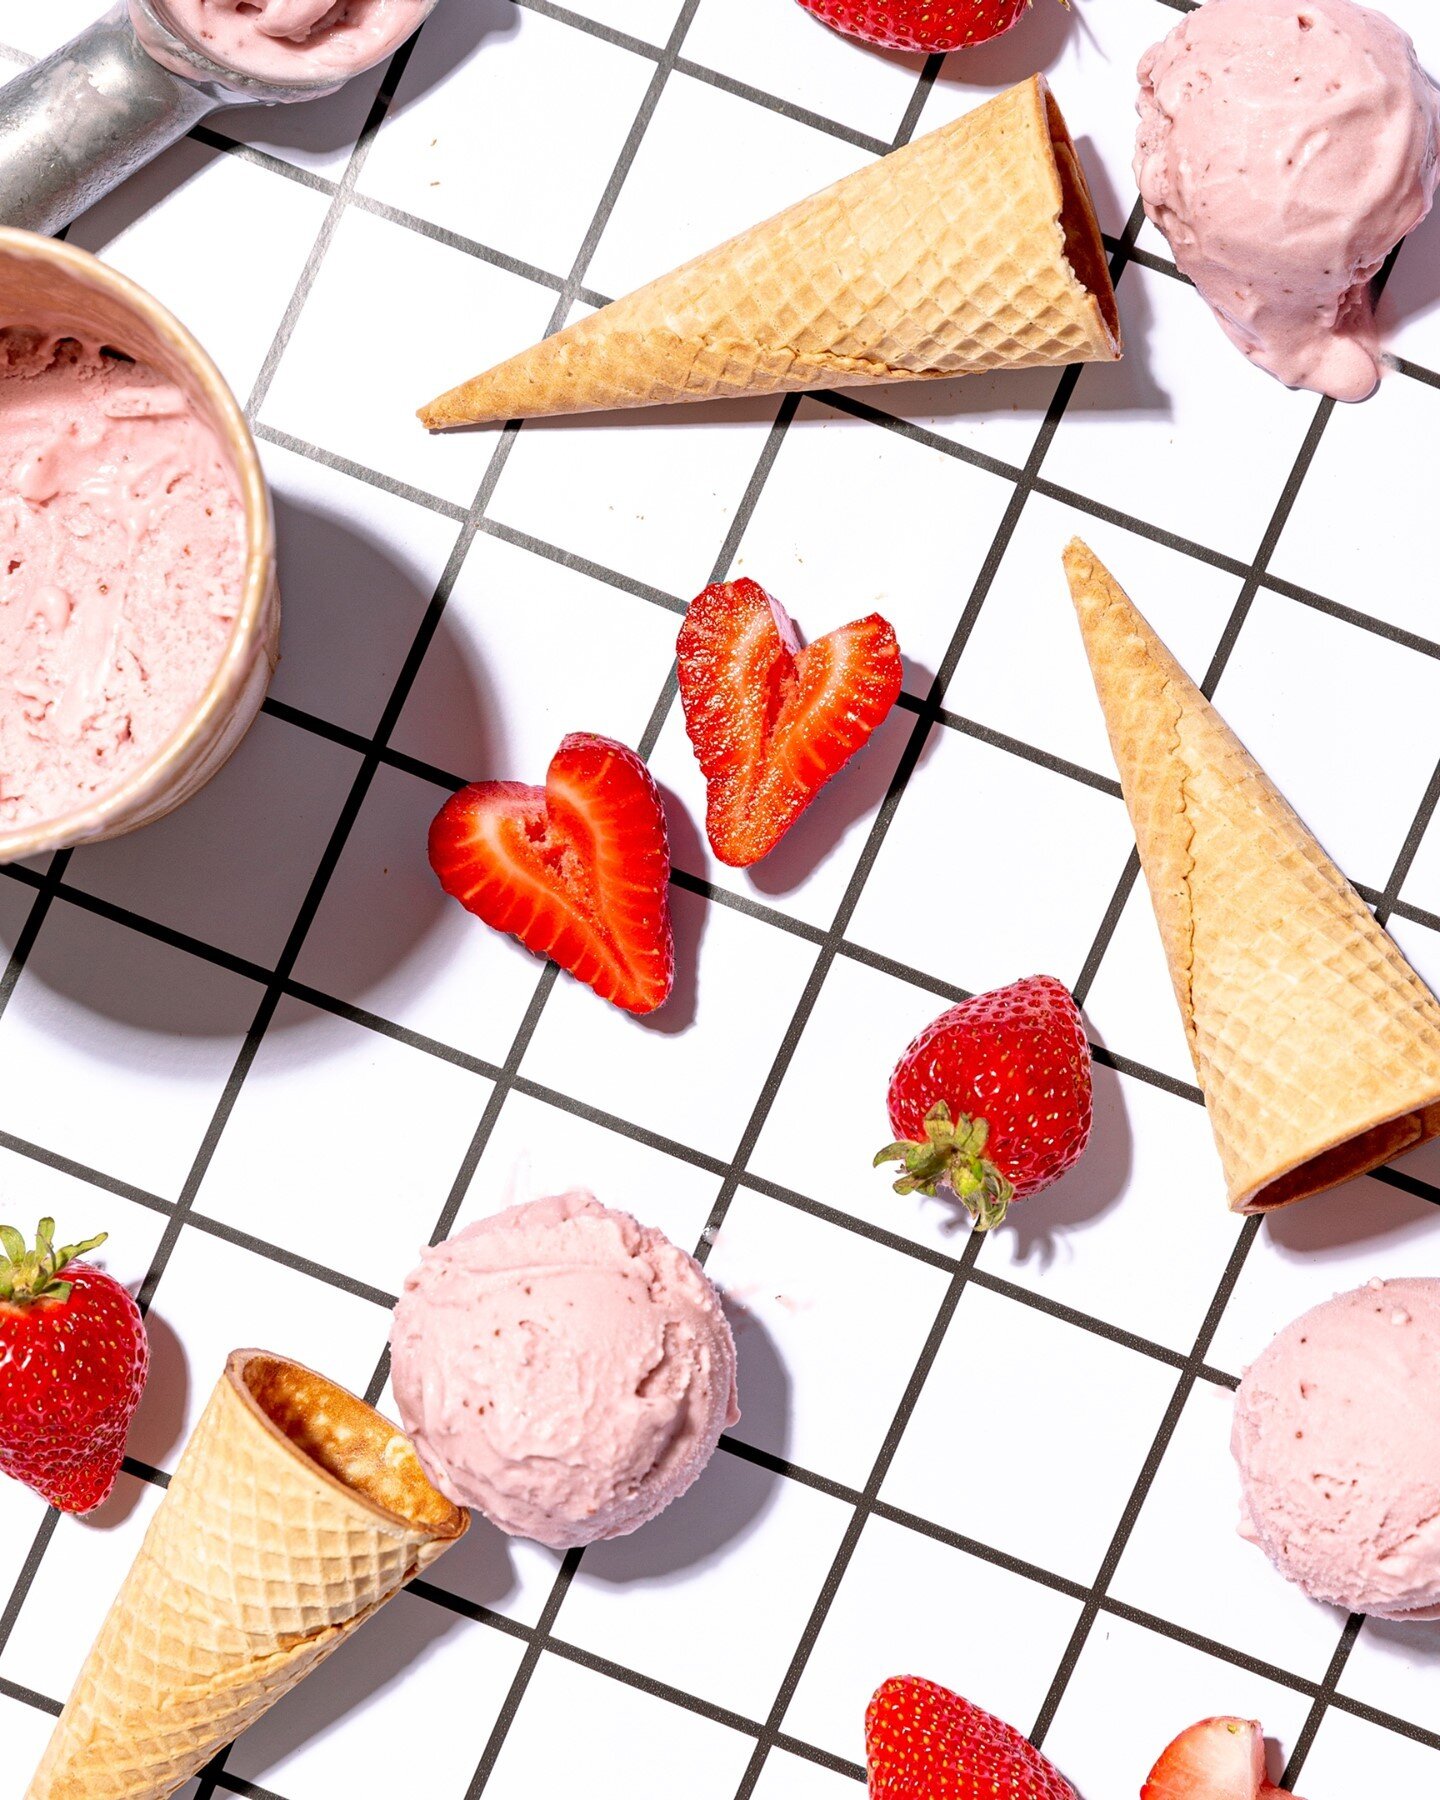 Seasonal licks are back! Cool off this summer with freshly churned vegan dream cream made with locally &amp; sustainably sourced ingredients 🌍 the quality of our ingredients is #1 to ensure that we can continue to enjoy what we eat physically and co